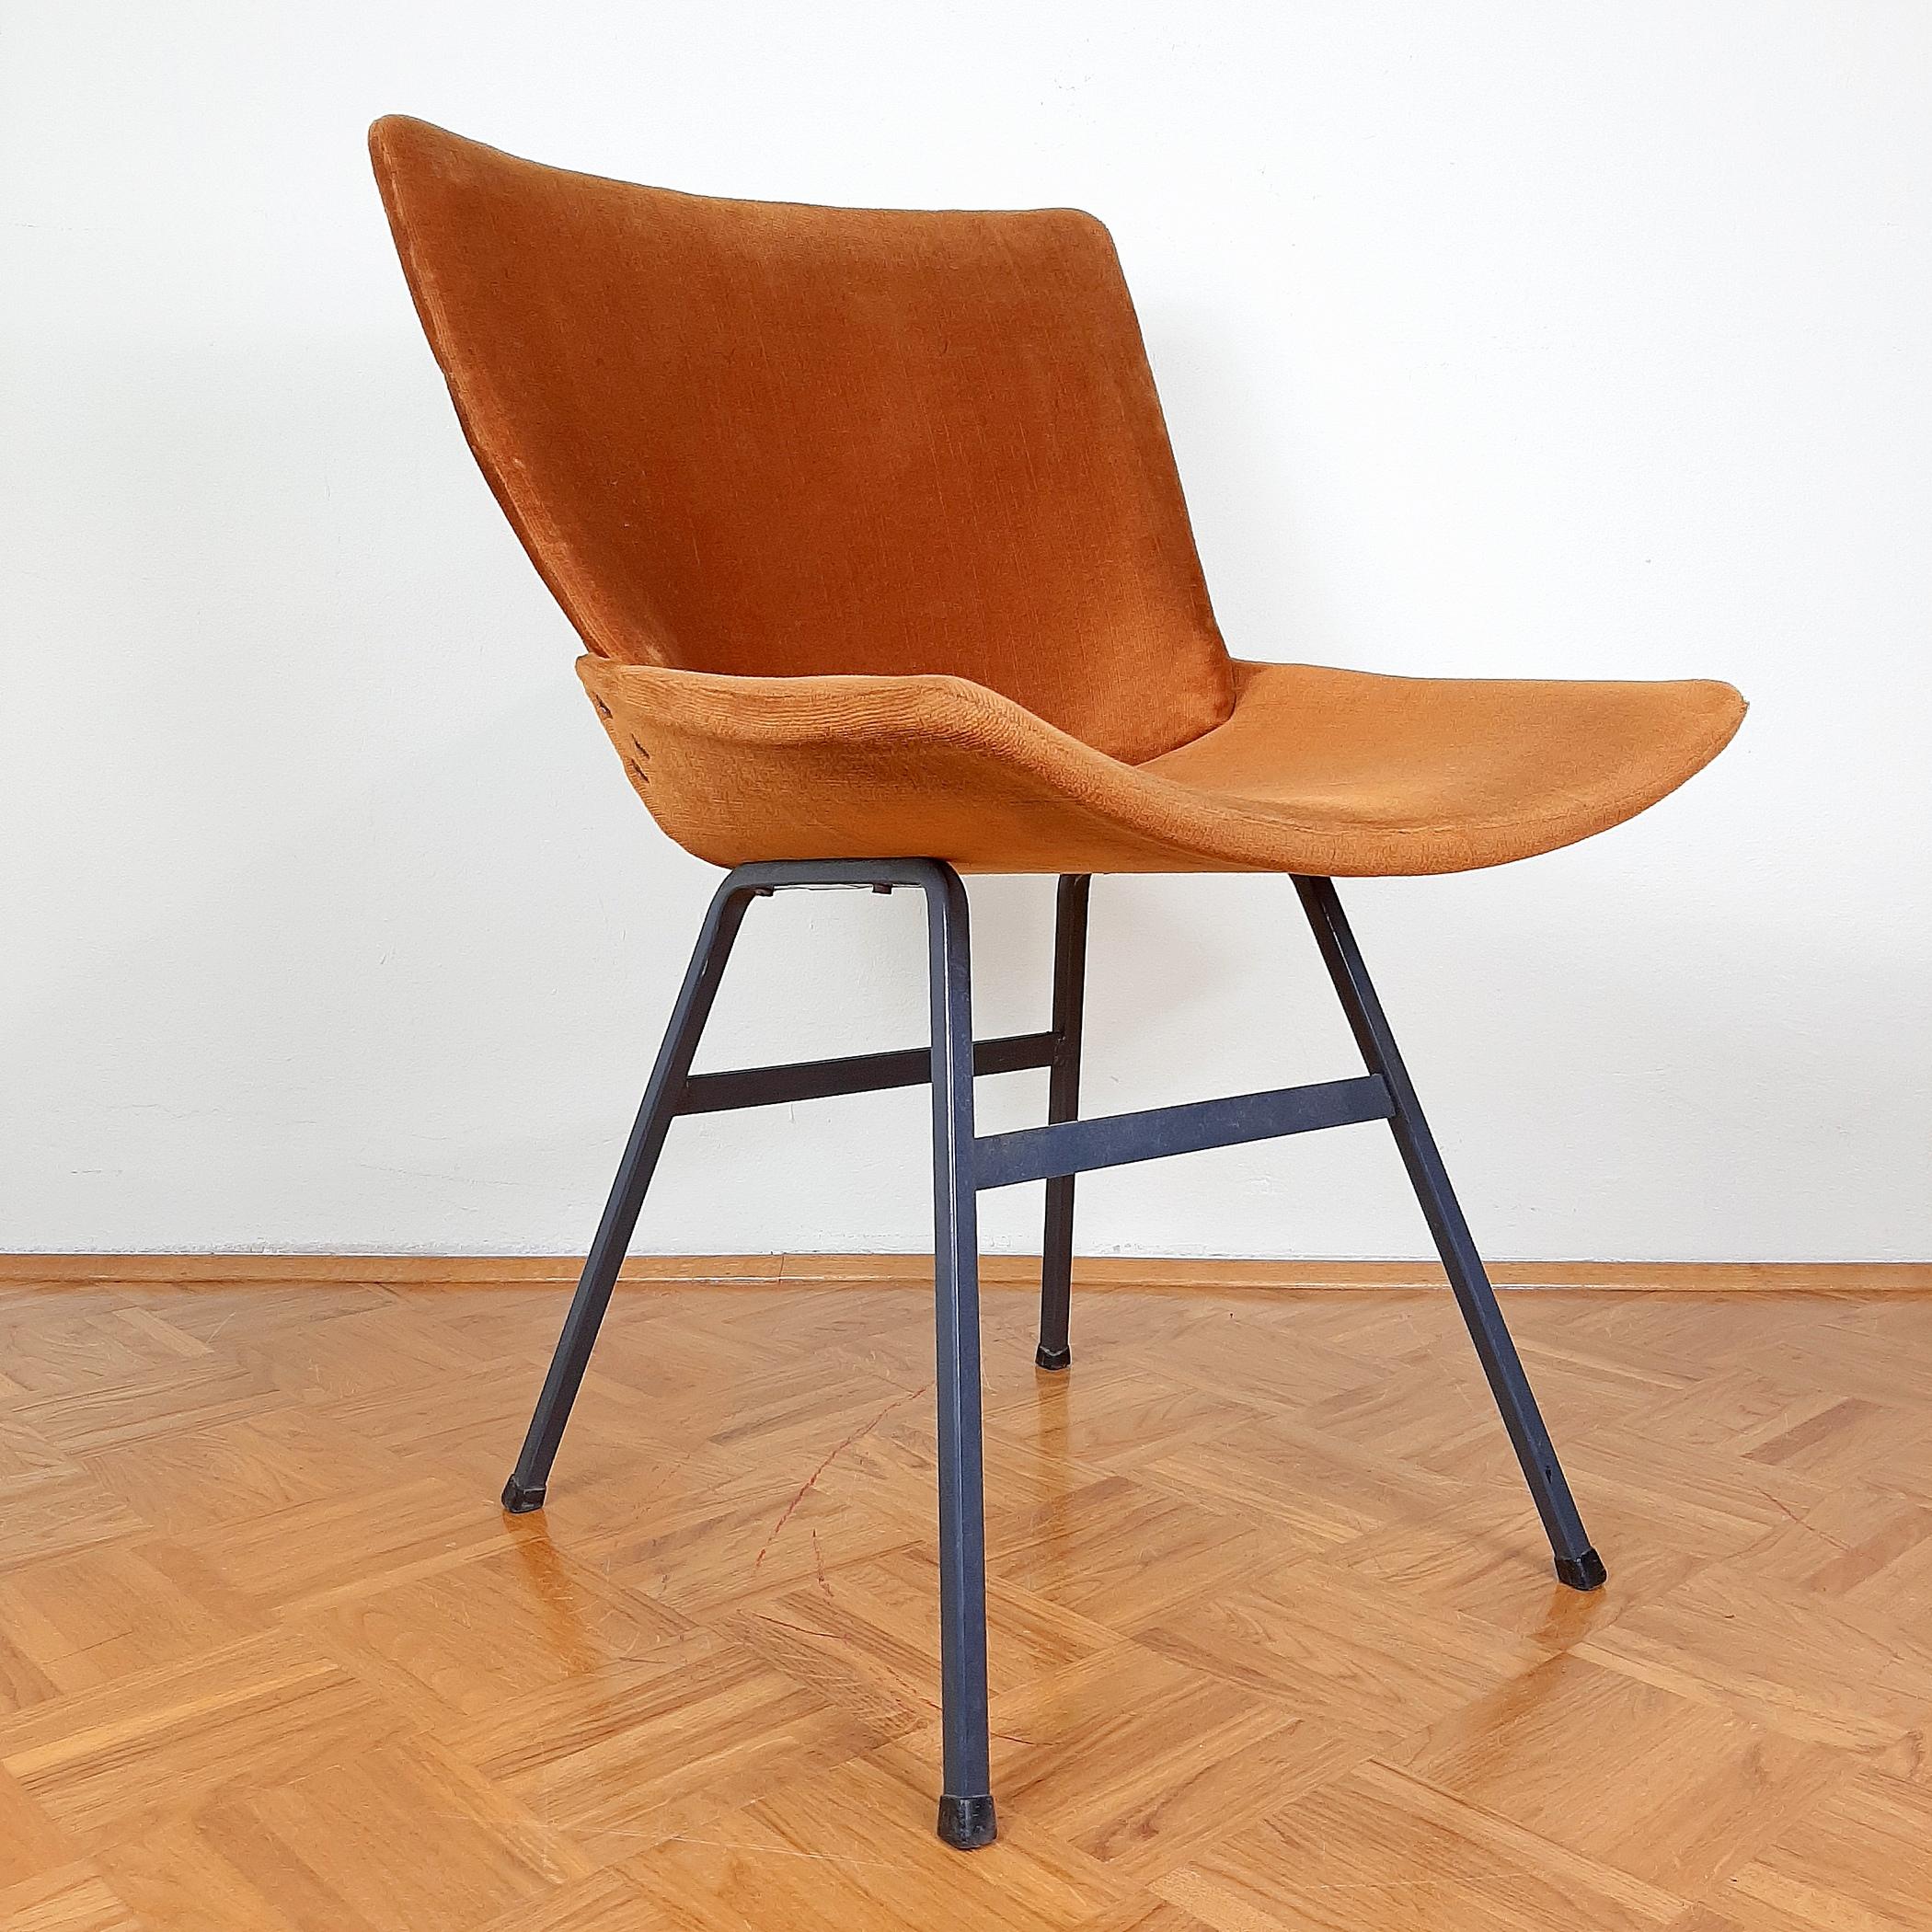 Presenting an original designer chair crafted by the renowned Yugoslav designer, Niko Kralj, this piece is an epitome of mid-century design excellence. Produced in Yugoslavia during the 1960s by the esteemed Stol Kamnik factory, this chair is part